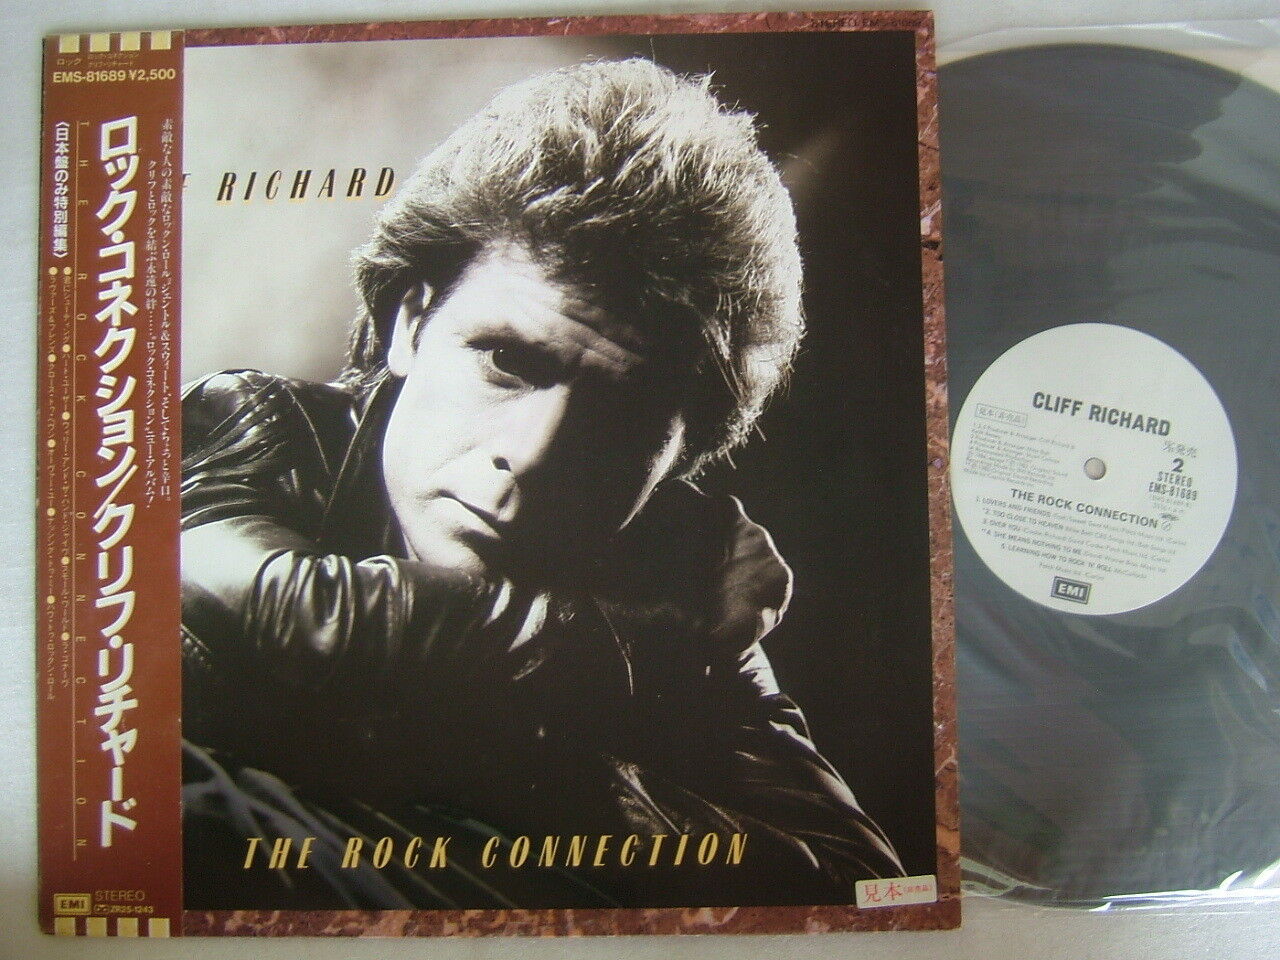 PROMO WHITE LABEL / CLIFF RICHARD THE ROCK CONNECTION / WITH OBI